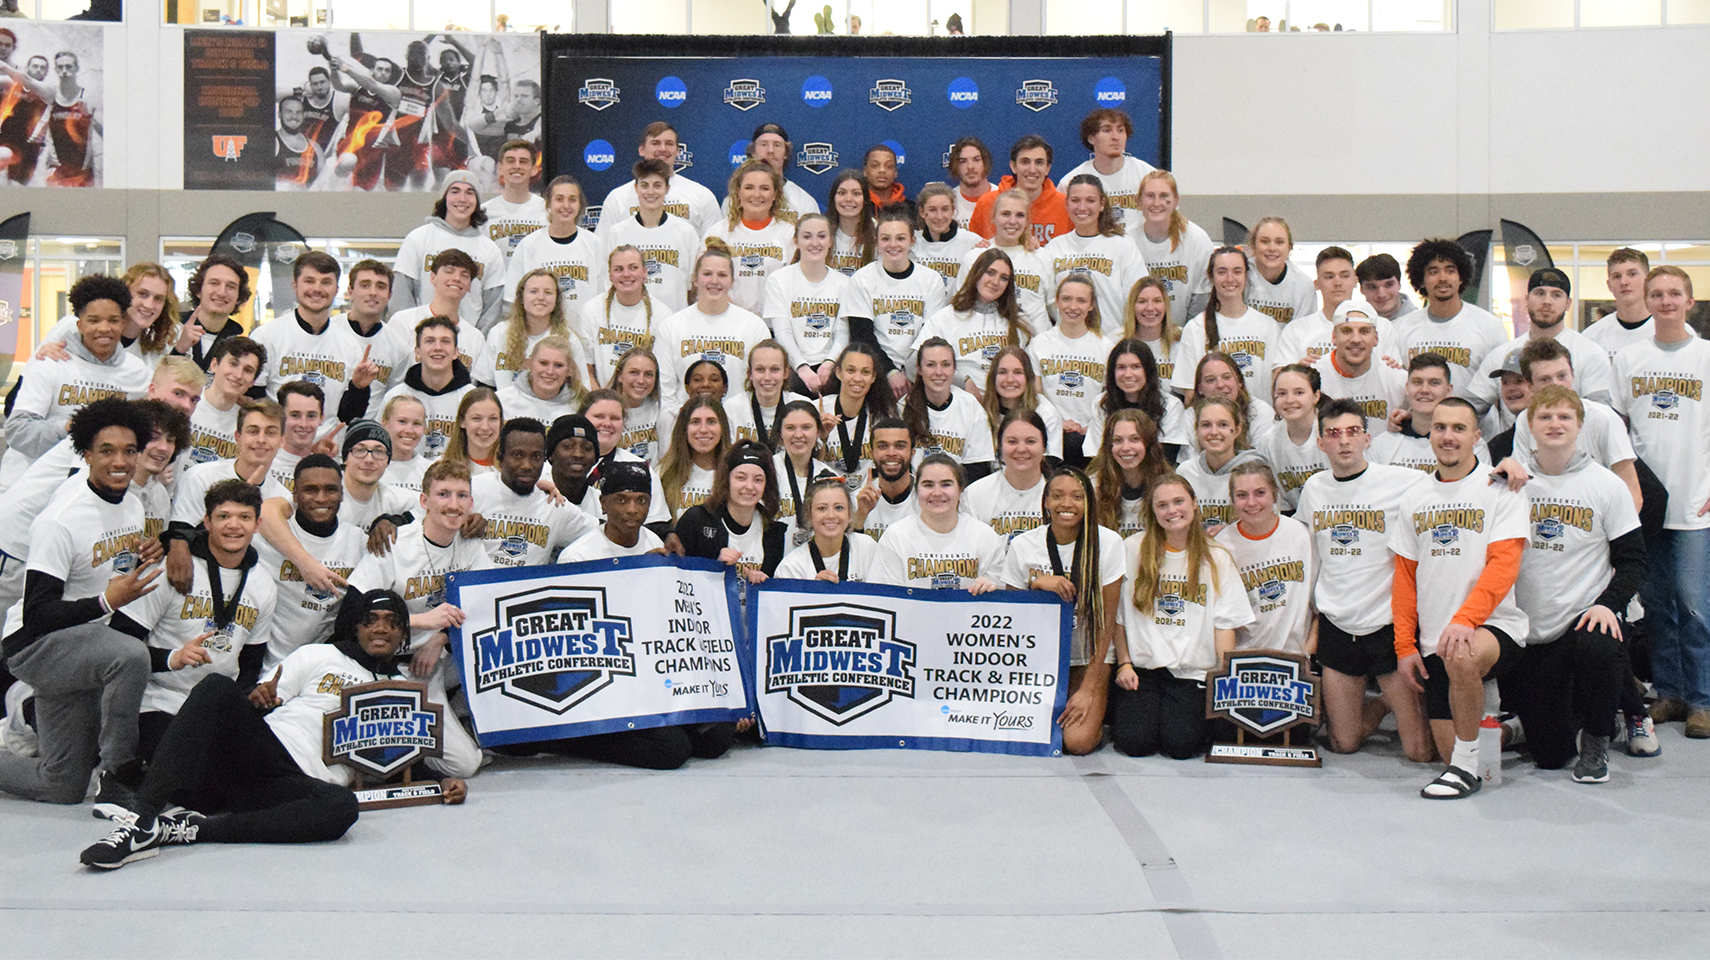 University of Findlay men and women's track teams with championship shirts on